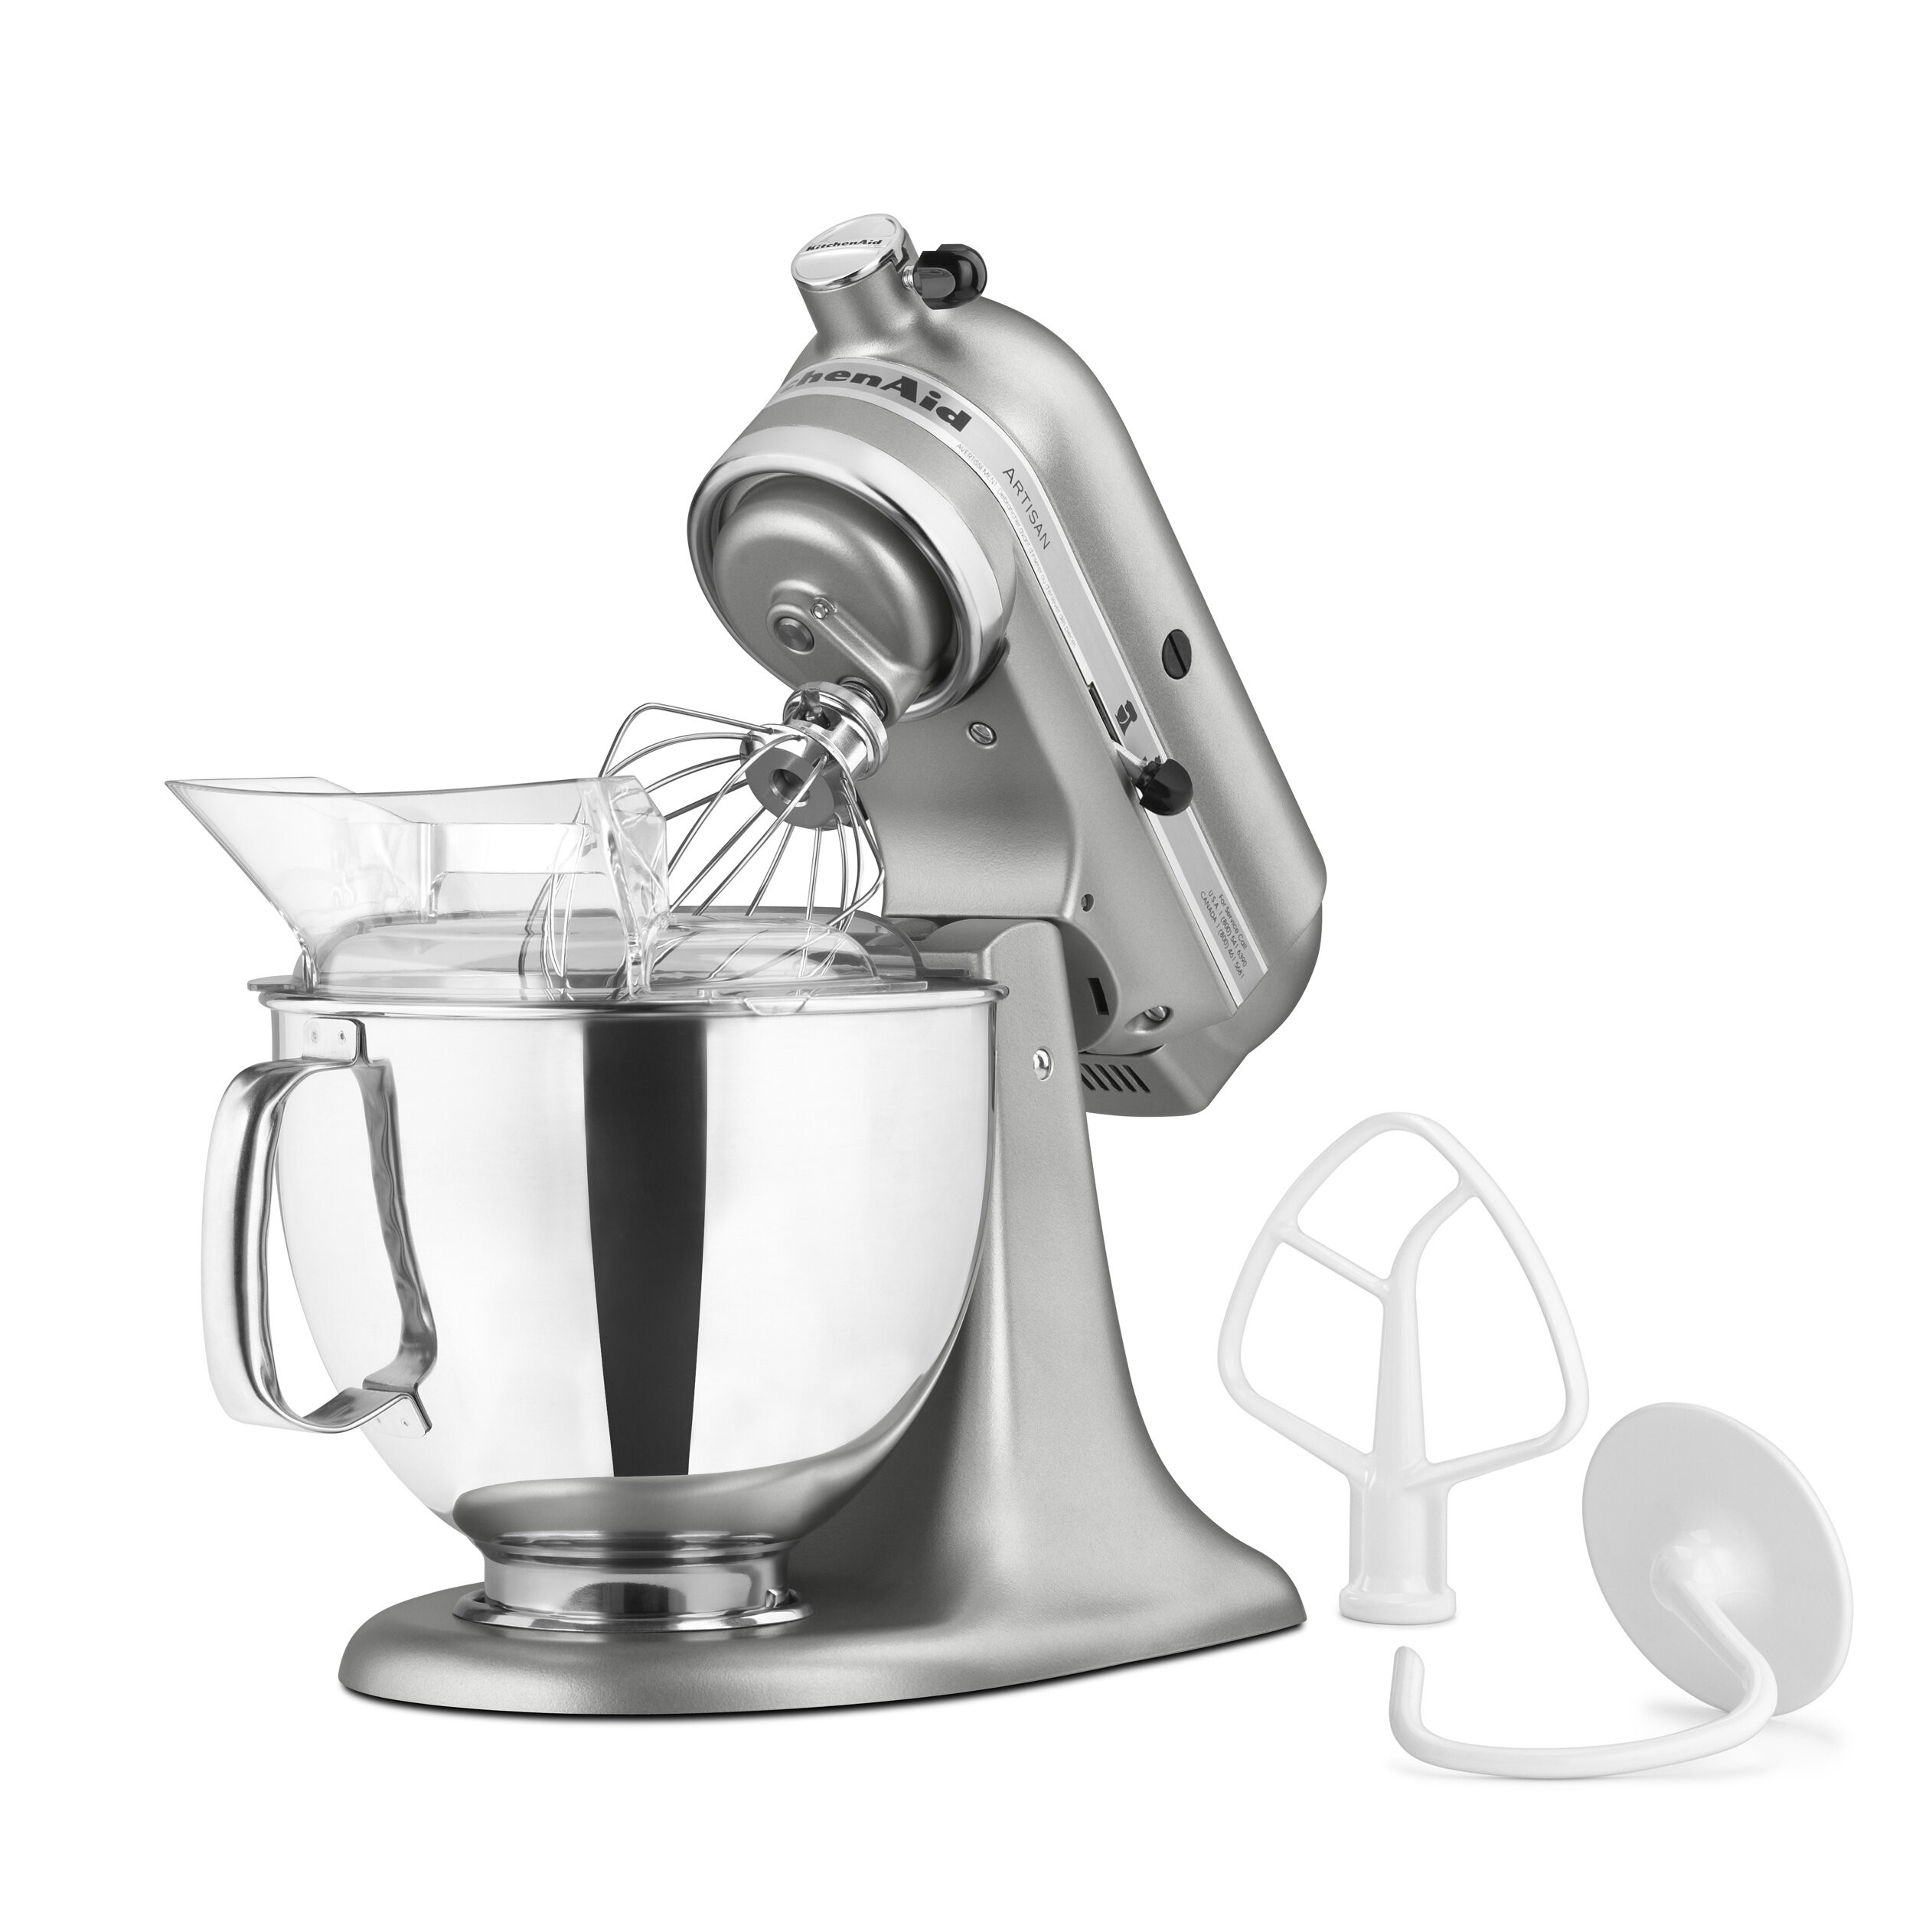  Stainless Steel Bowl for KitchenAid 4.5-5QT Tilt-Head Mixer  with Pouring Shield, Compatible with KitchenAid Artisan Series Mixers, As  KitchenAid Attachment for Stand Mixer by Hozodo: Home & Kitchen